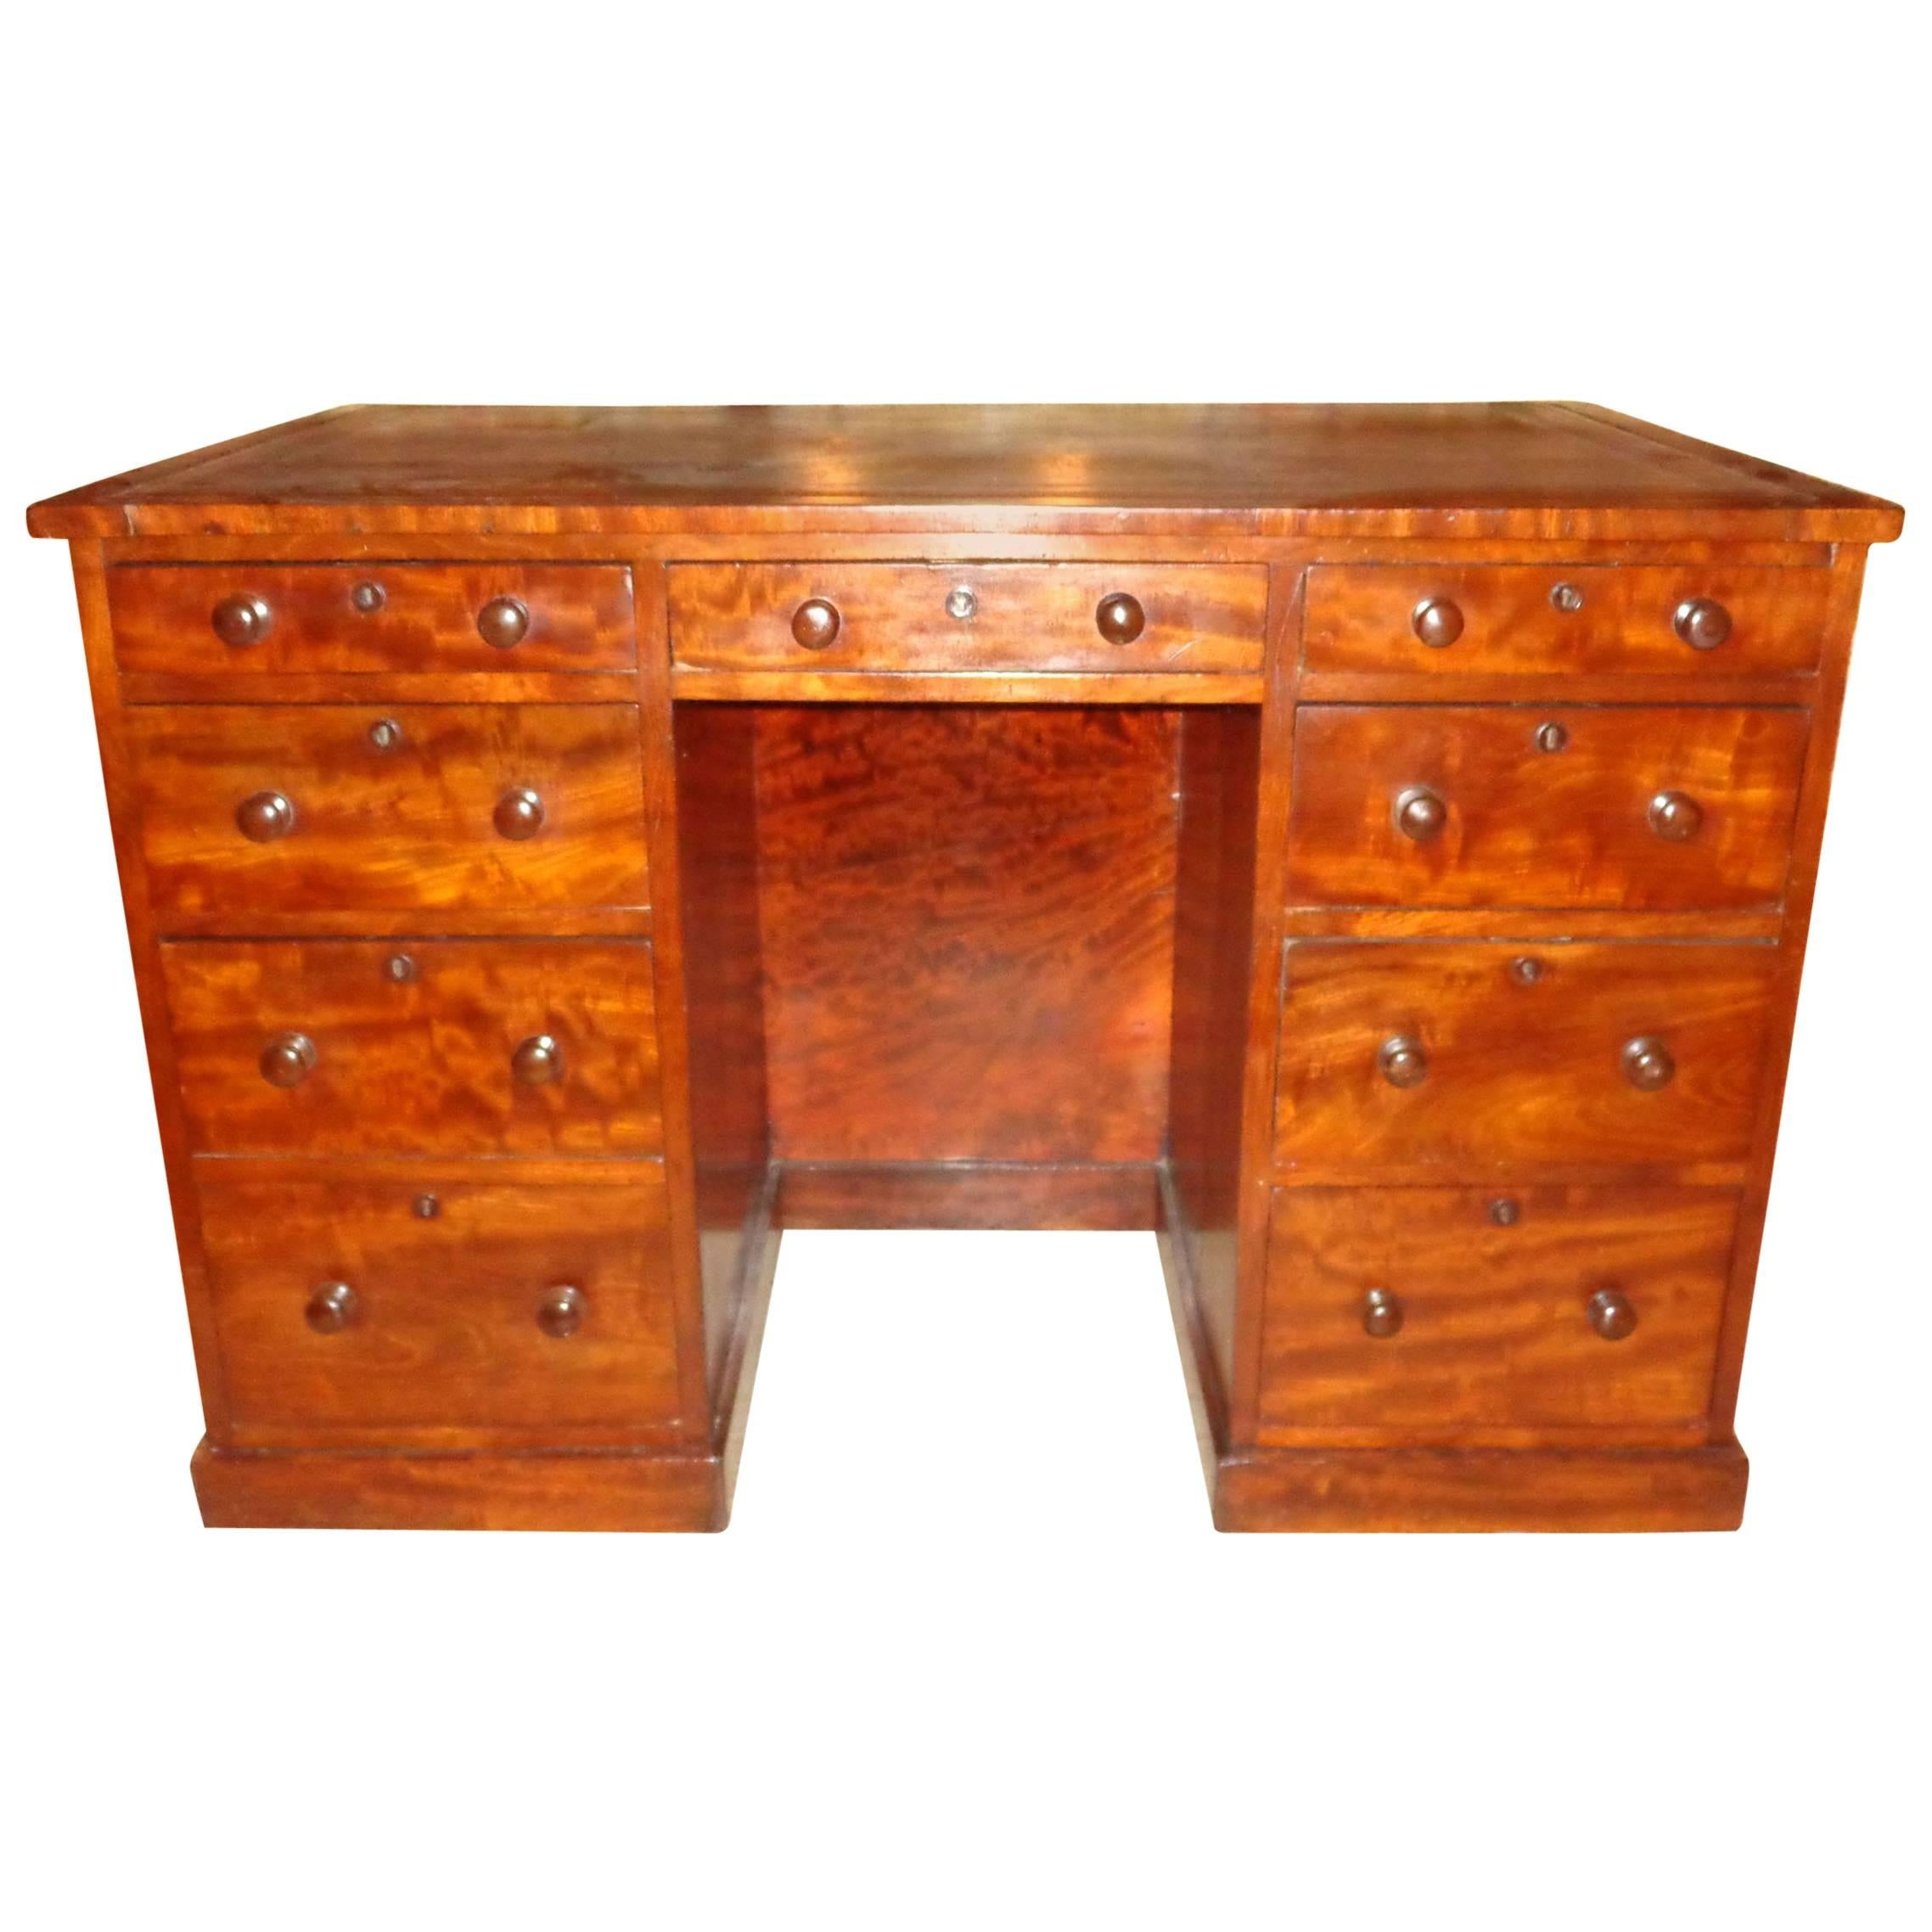 Early 19th Century English Knee-Hole Map Desk For Sale